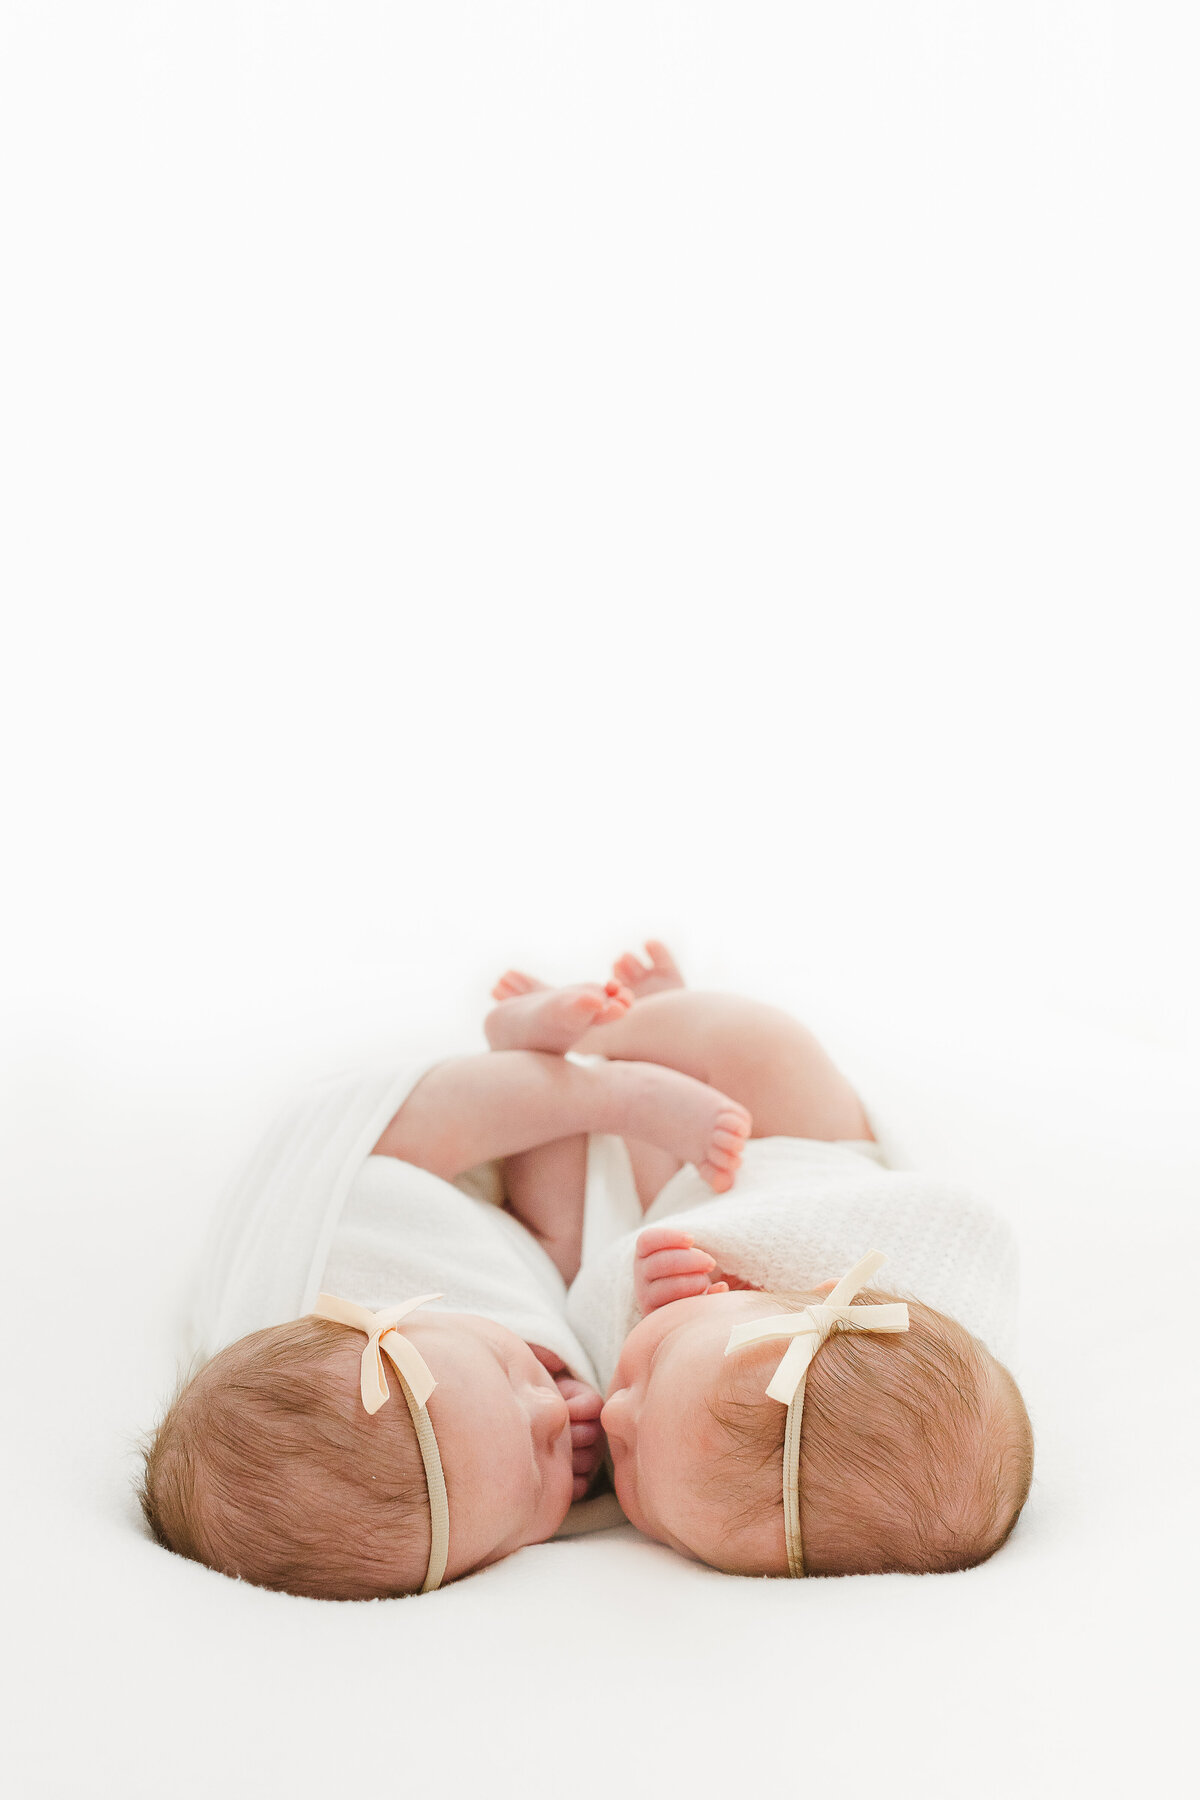 A photo of twin newborn baby girls snuggling nose to nose on a white blanket in front of a window by DC Baby Photographer